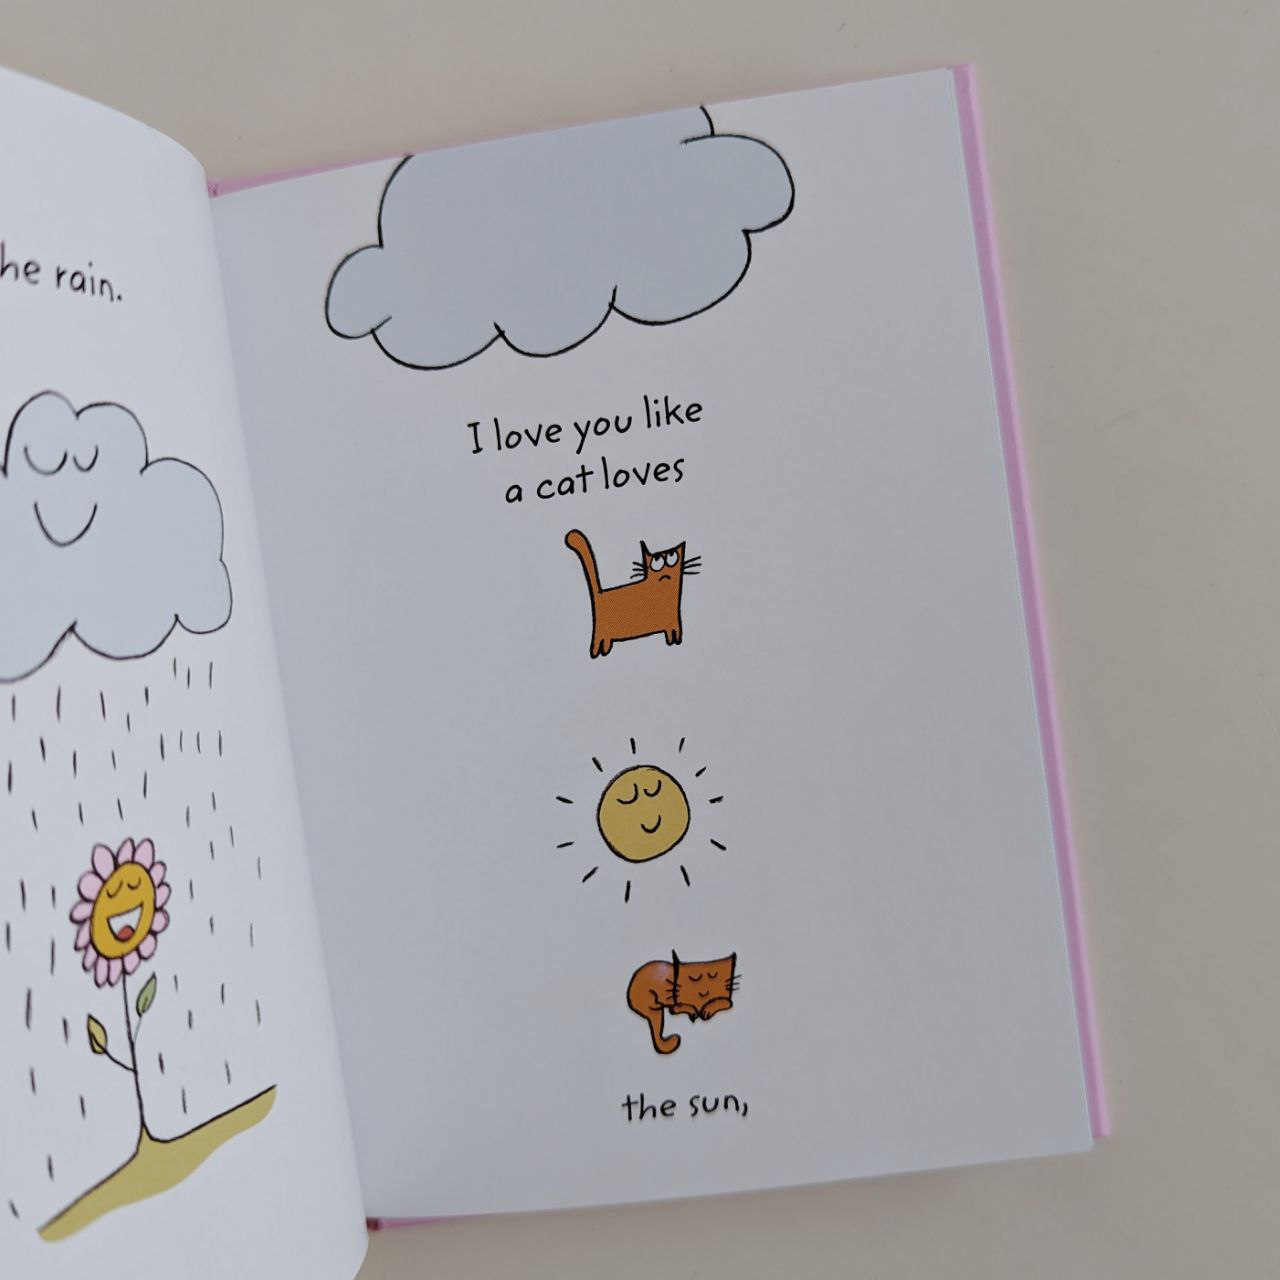 I Love You Like by Lisa Swerling and Ralph Lazar